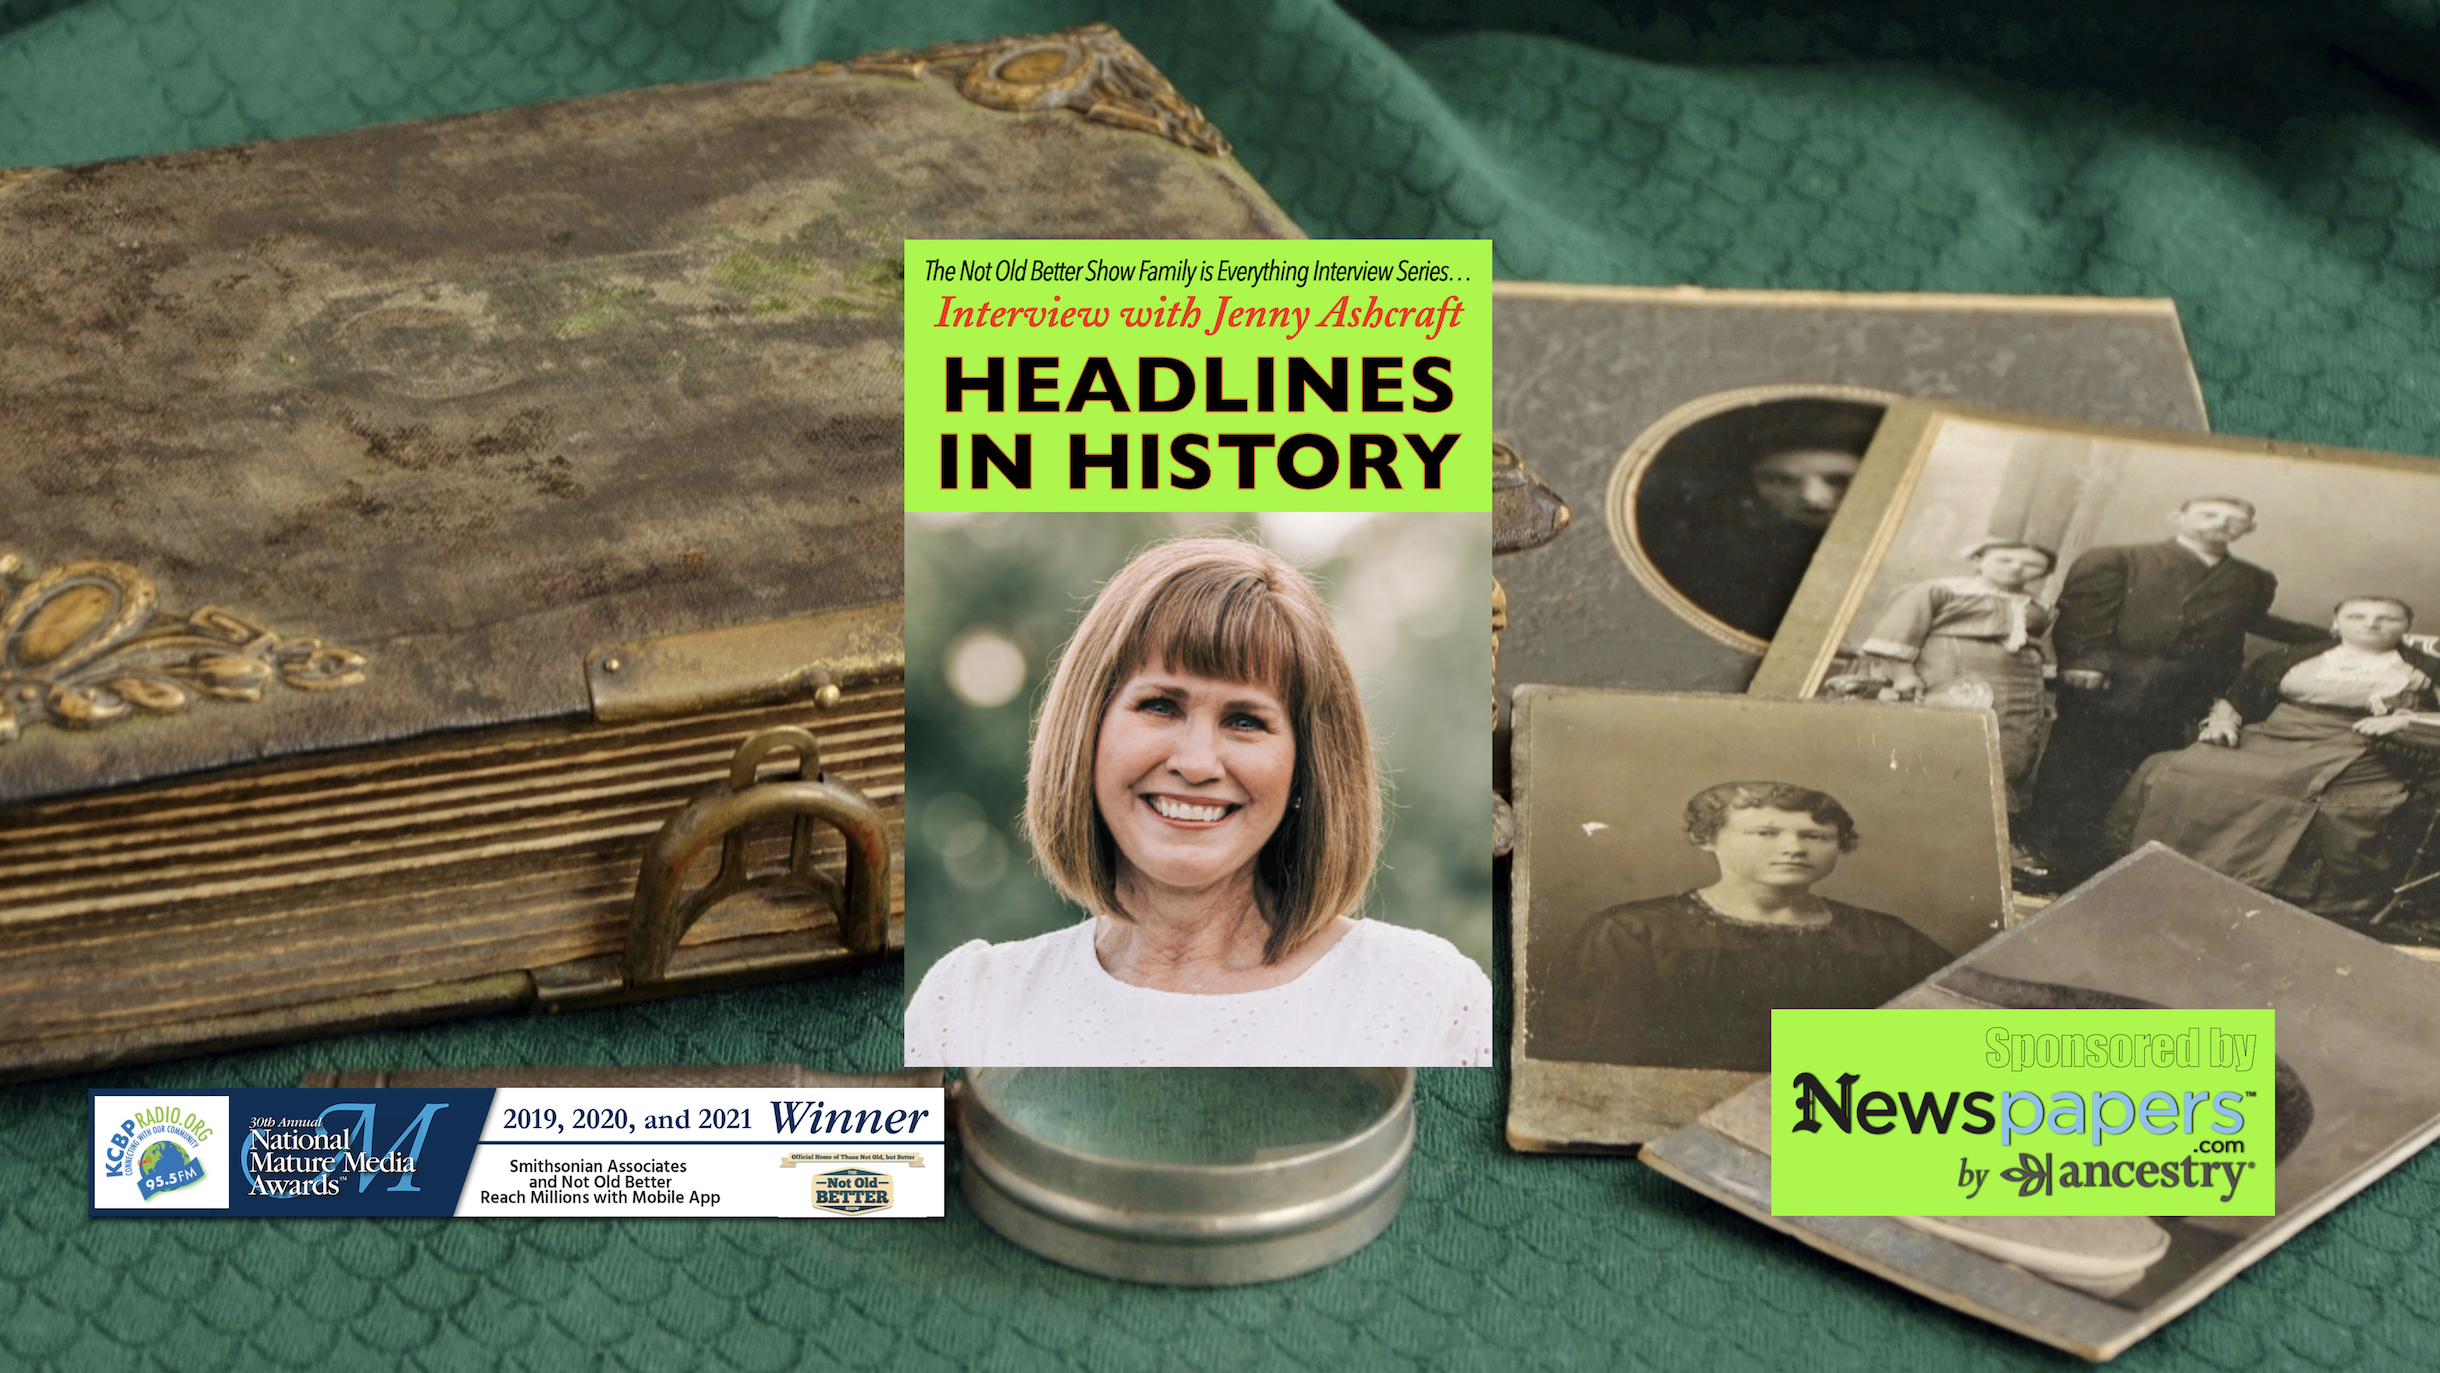 Jenny Ashcraft – Genealogy, Newspaper Headlines, and Stories You’ll Love